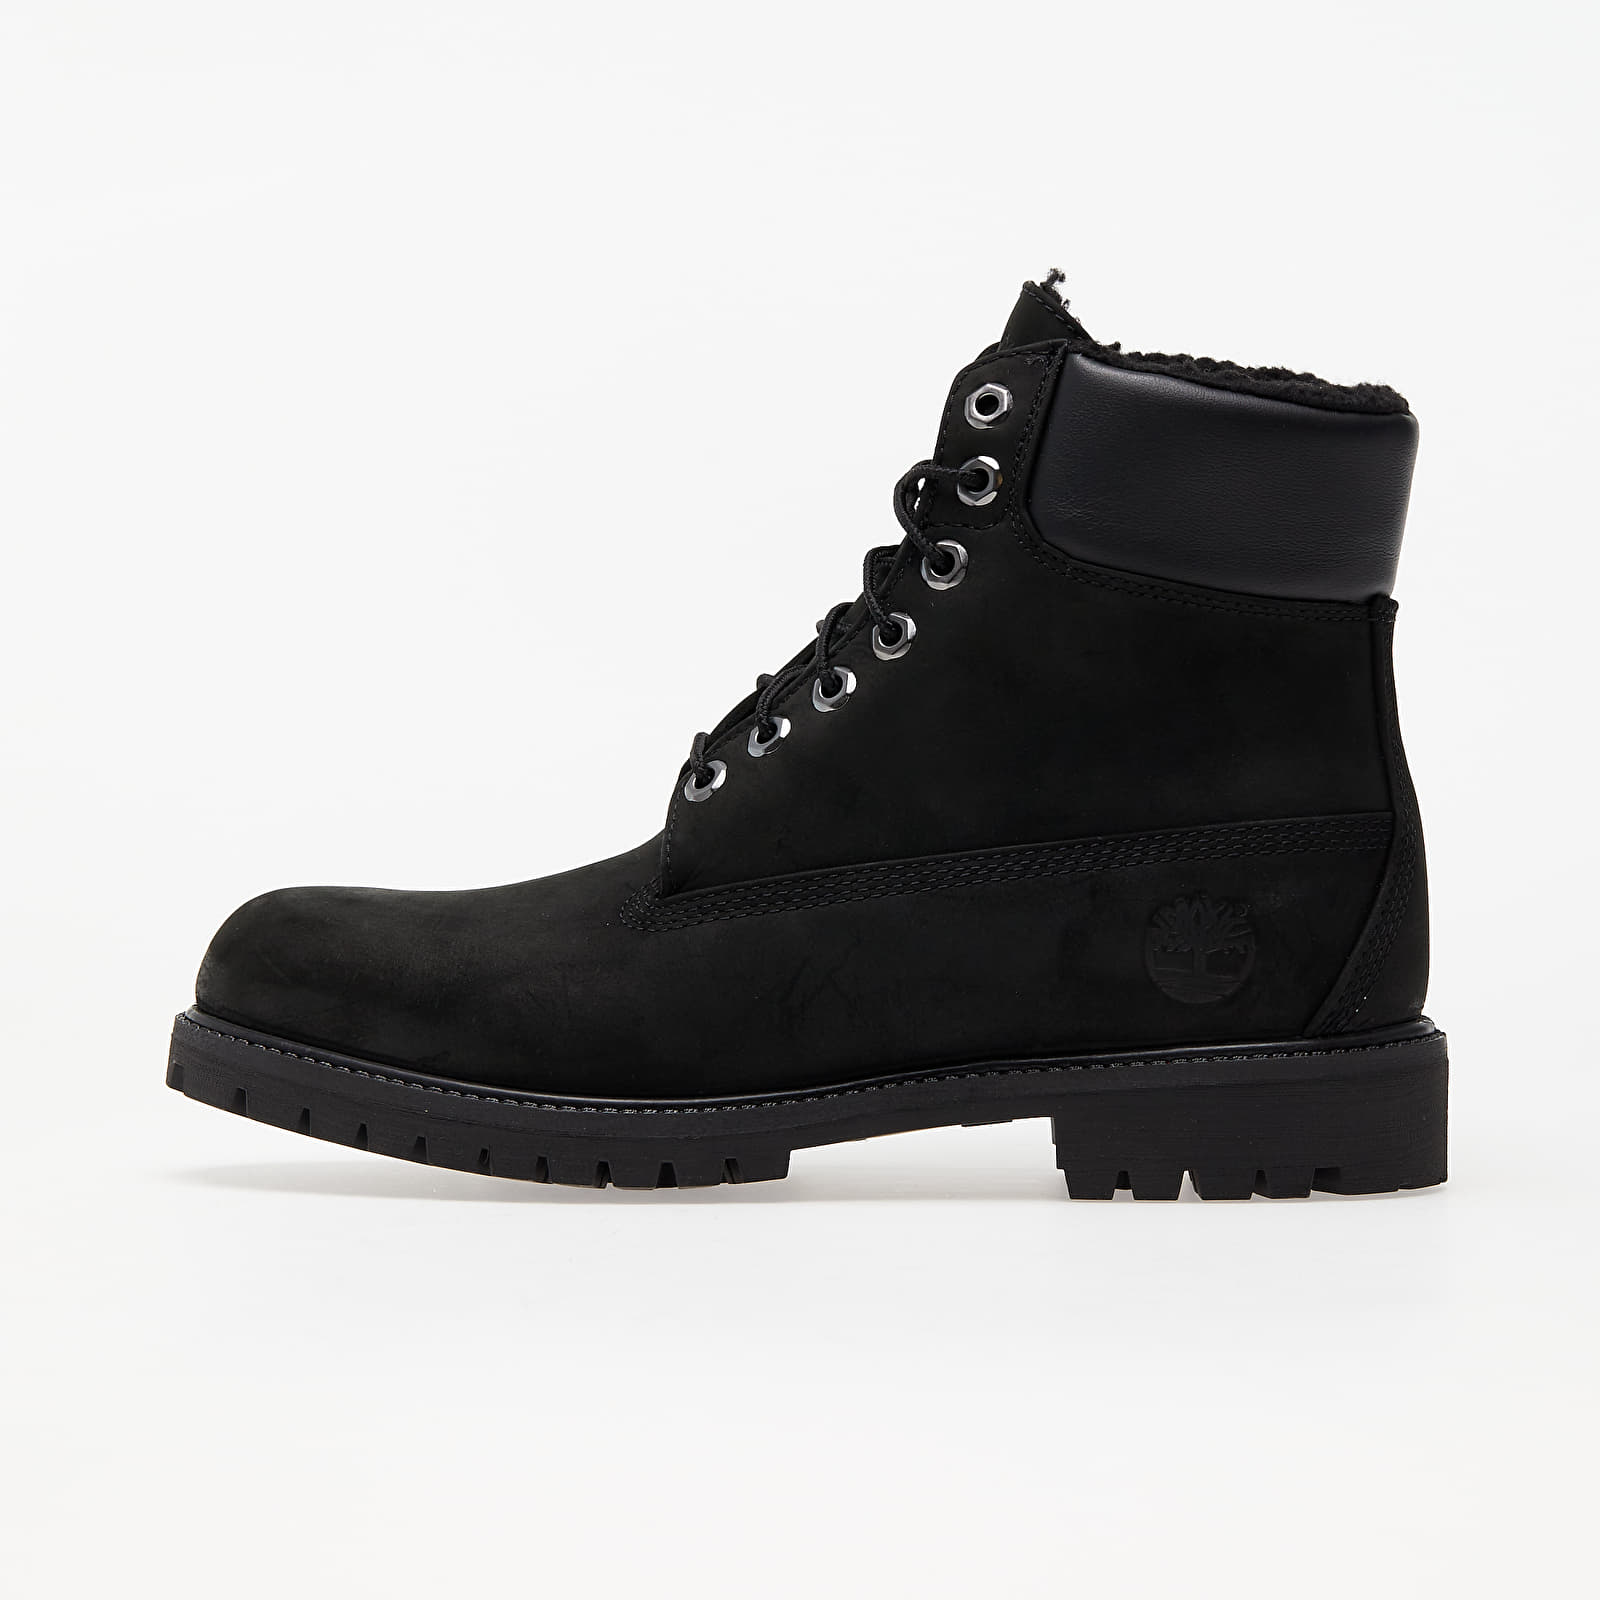 Men's shoes Timberland 6 In Premium Fur Lined Black